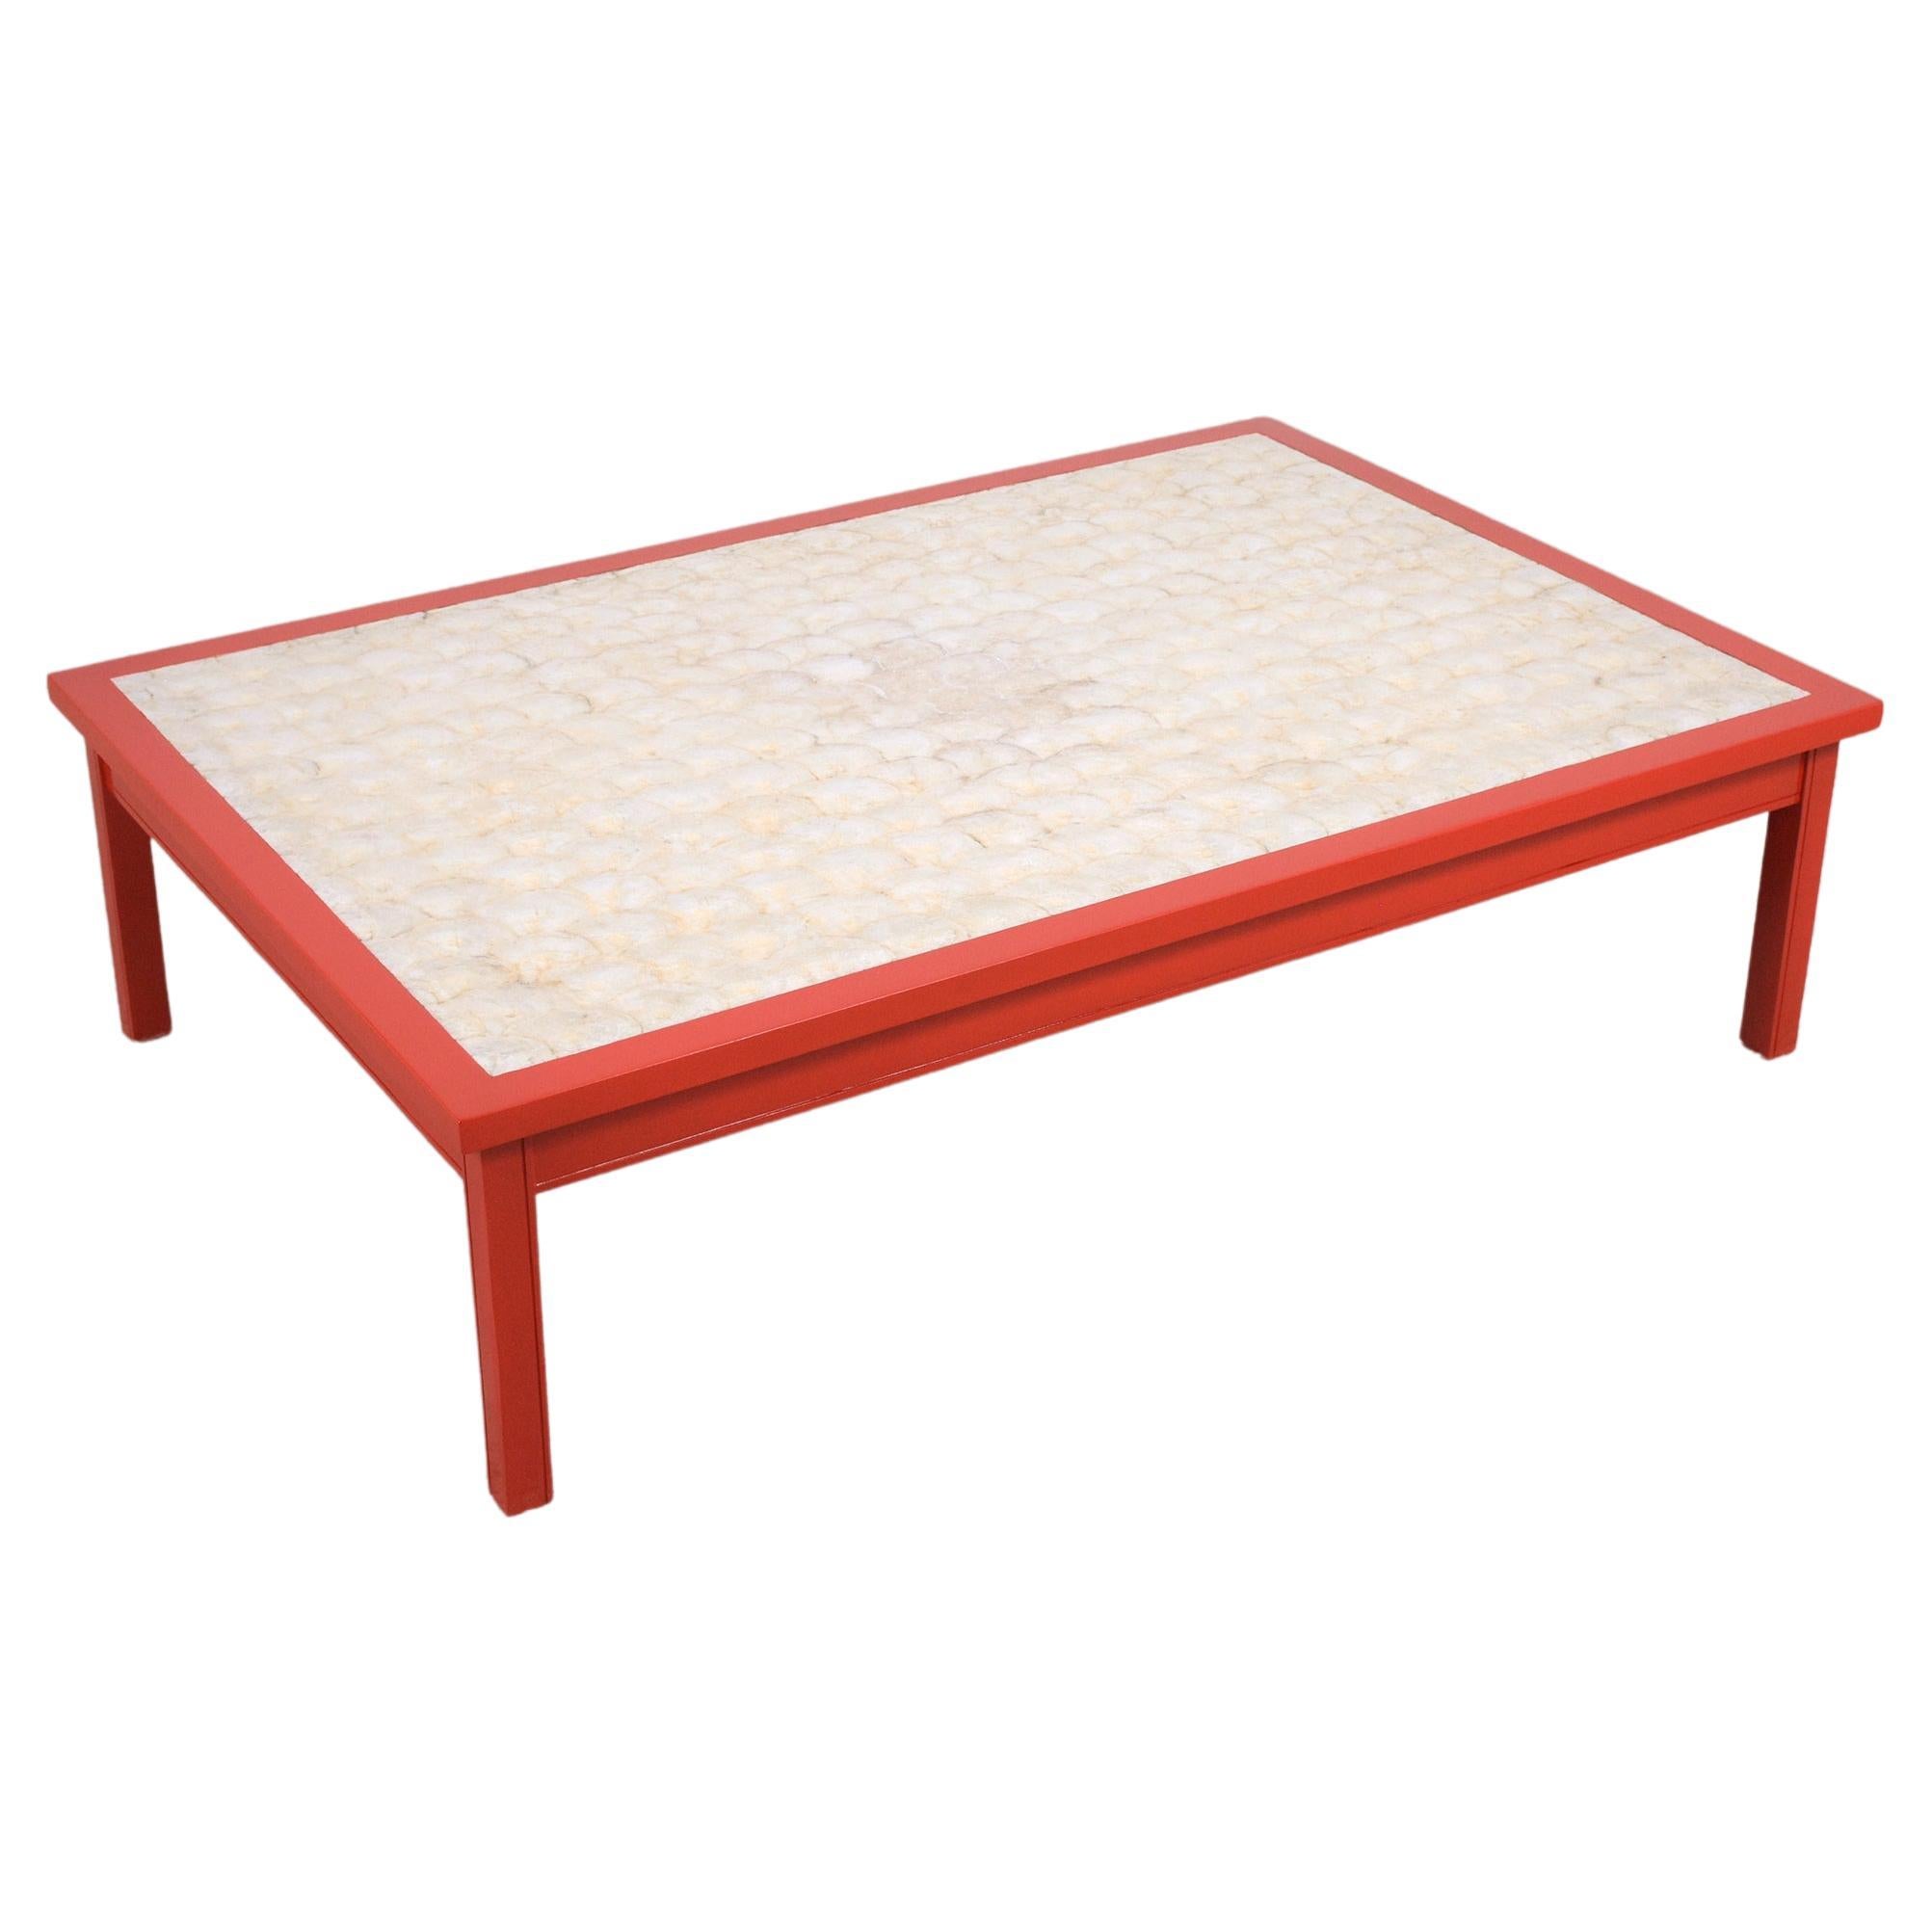 Vibrant Red Mid-Century Modern Coffee Table with Mother-of-Pearl Veneer For Sale